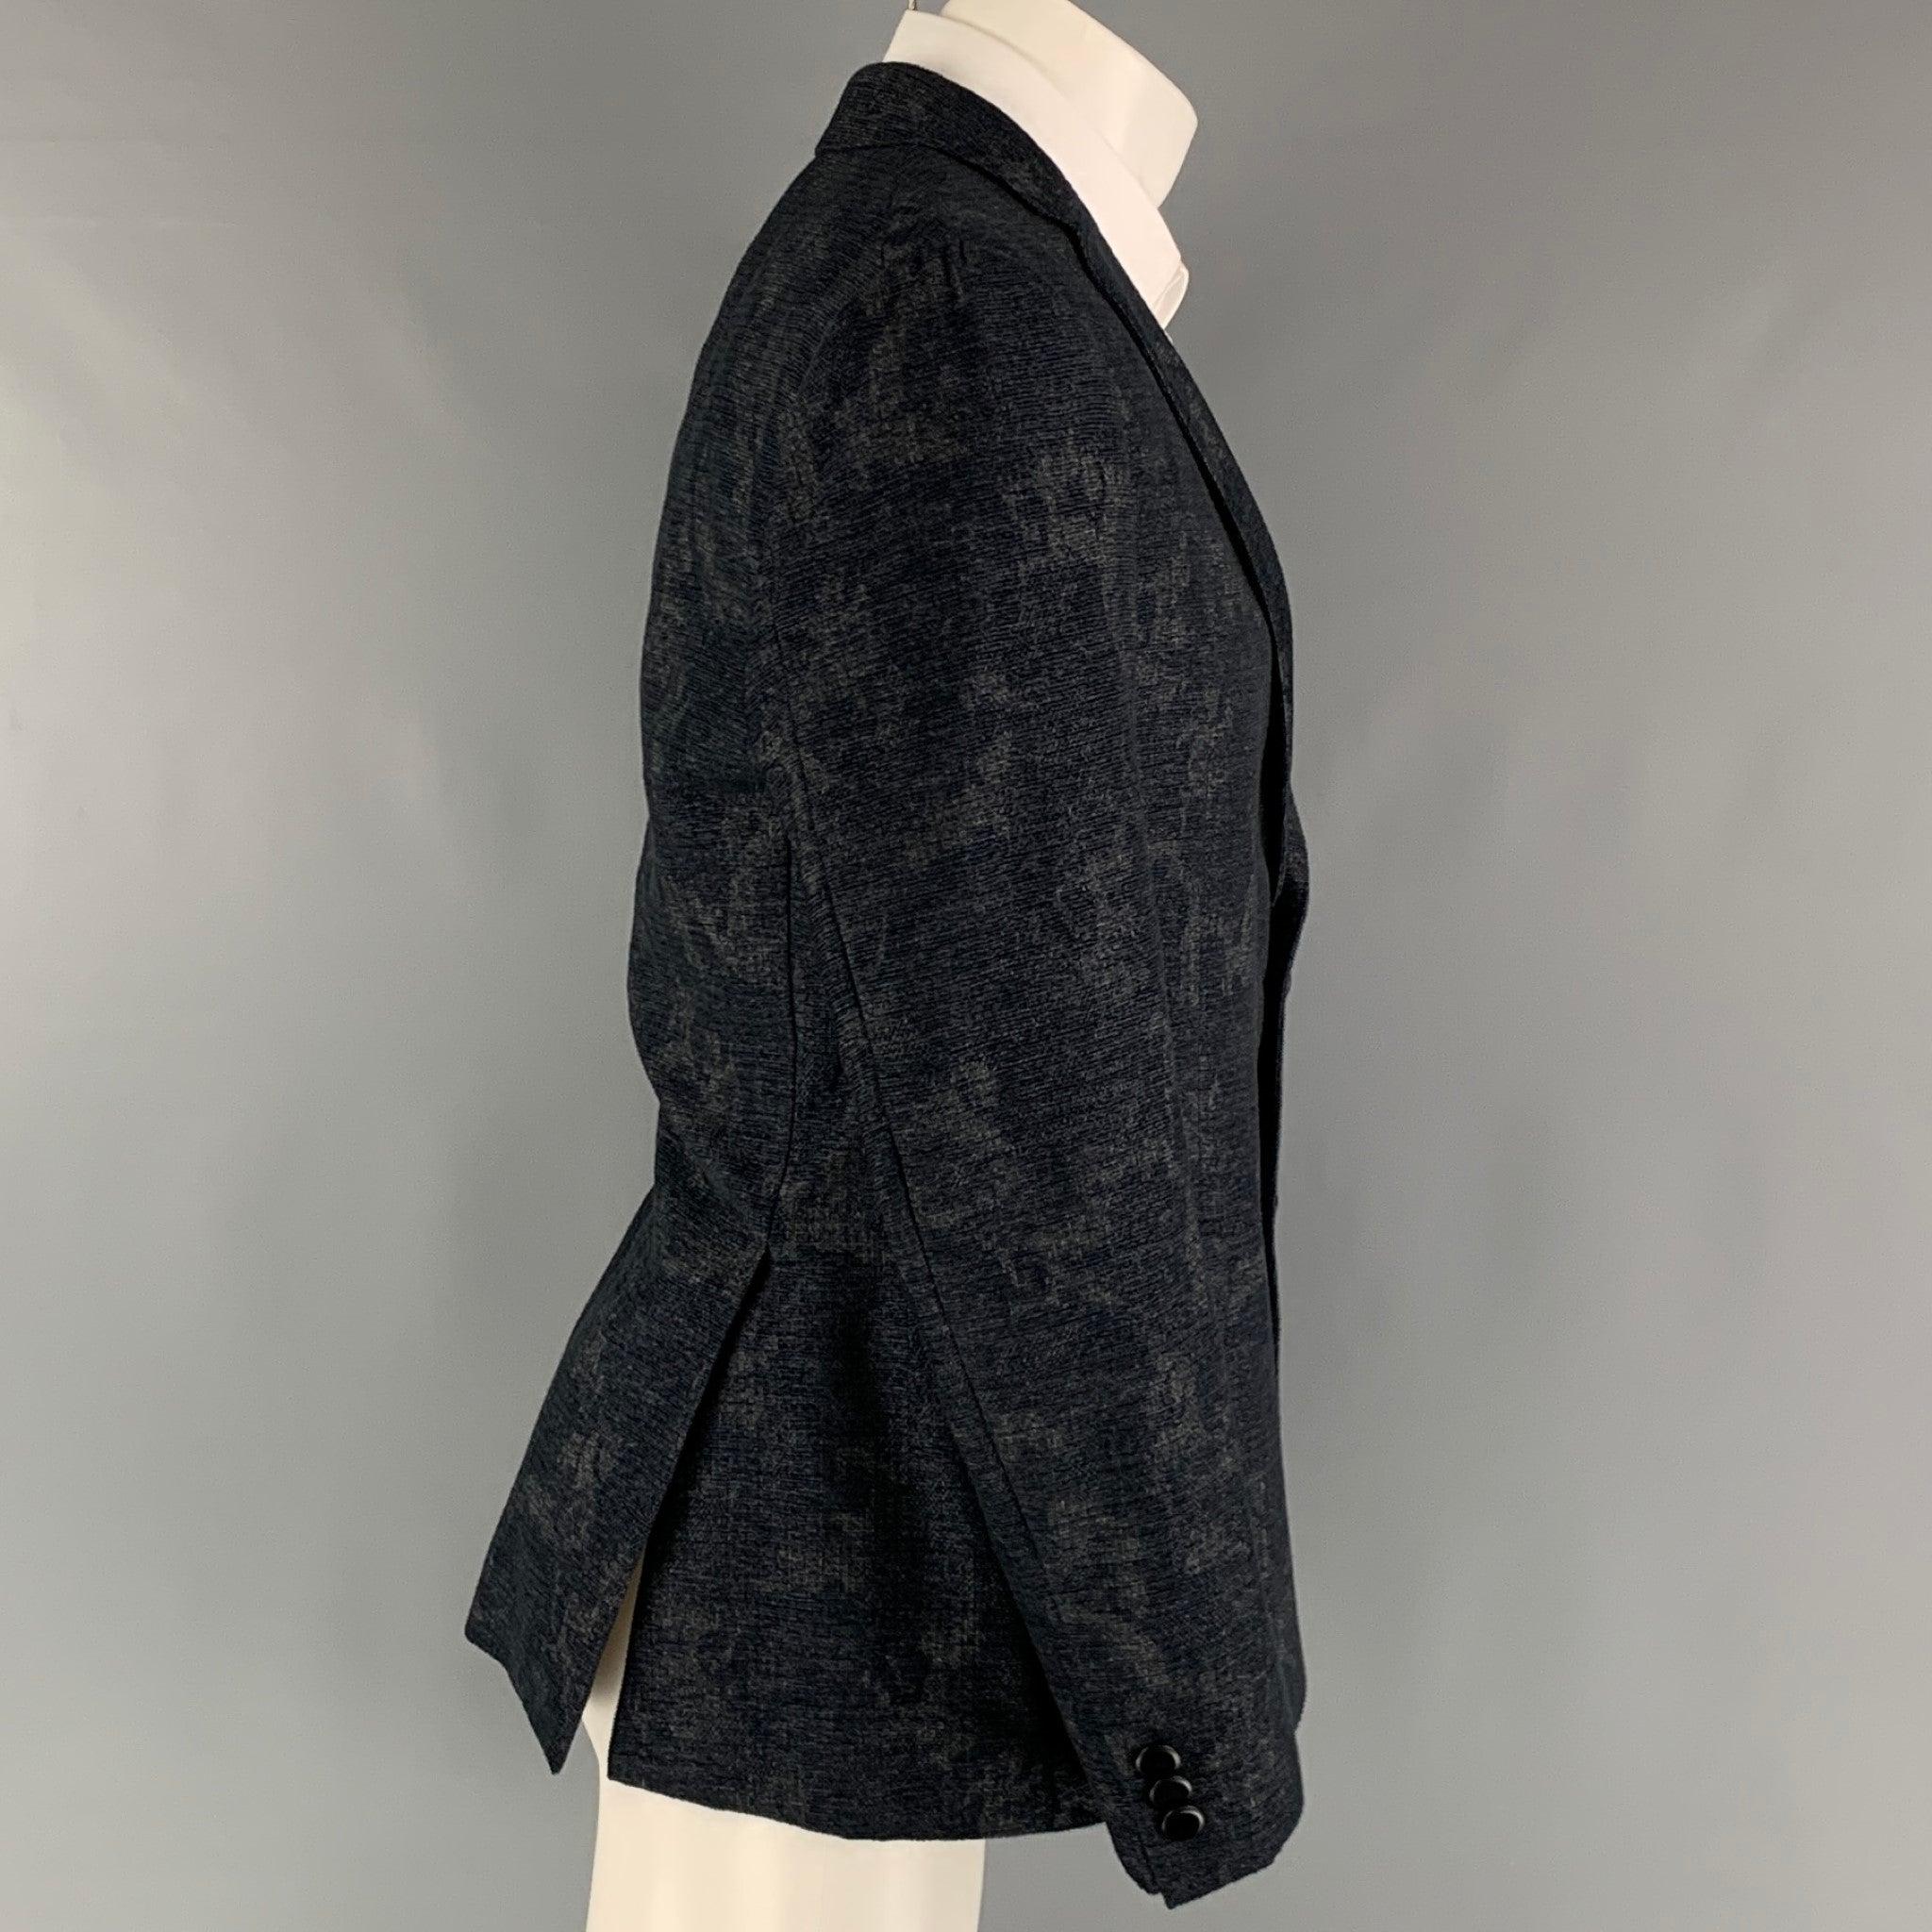 ETRO sport coat comes in a navy and grey jacquard wool and cotton woven material with full lining featuring a notch lapel, patch pockets, double back vent, and a two button closure. Made in Italy.Excellent Pre-Owned Condition. 

Marked:   IT 50